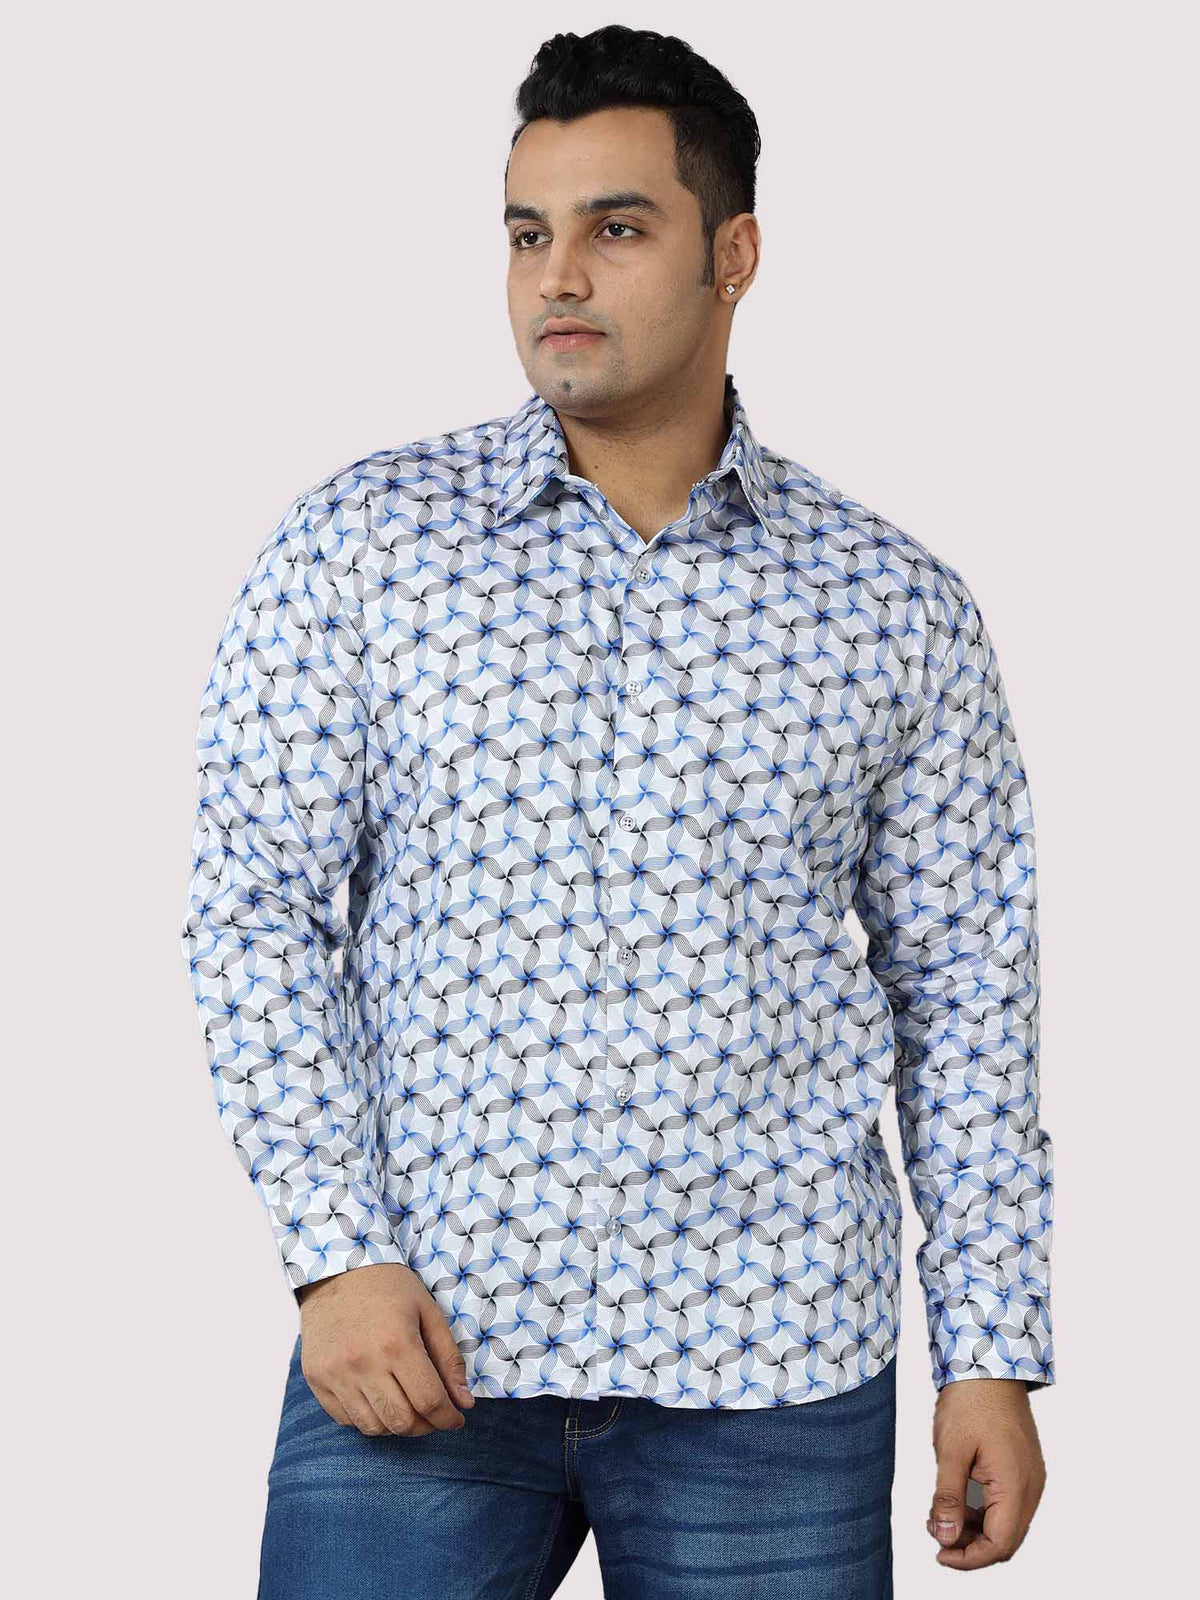 Twisted Flower Printed Cotton Full Shirt Men's Plus Size